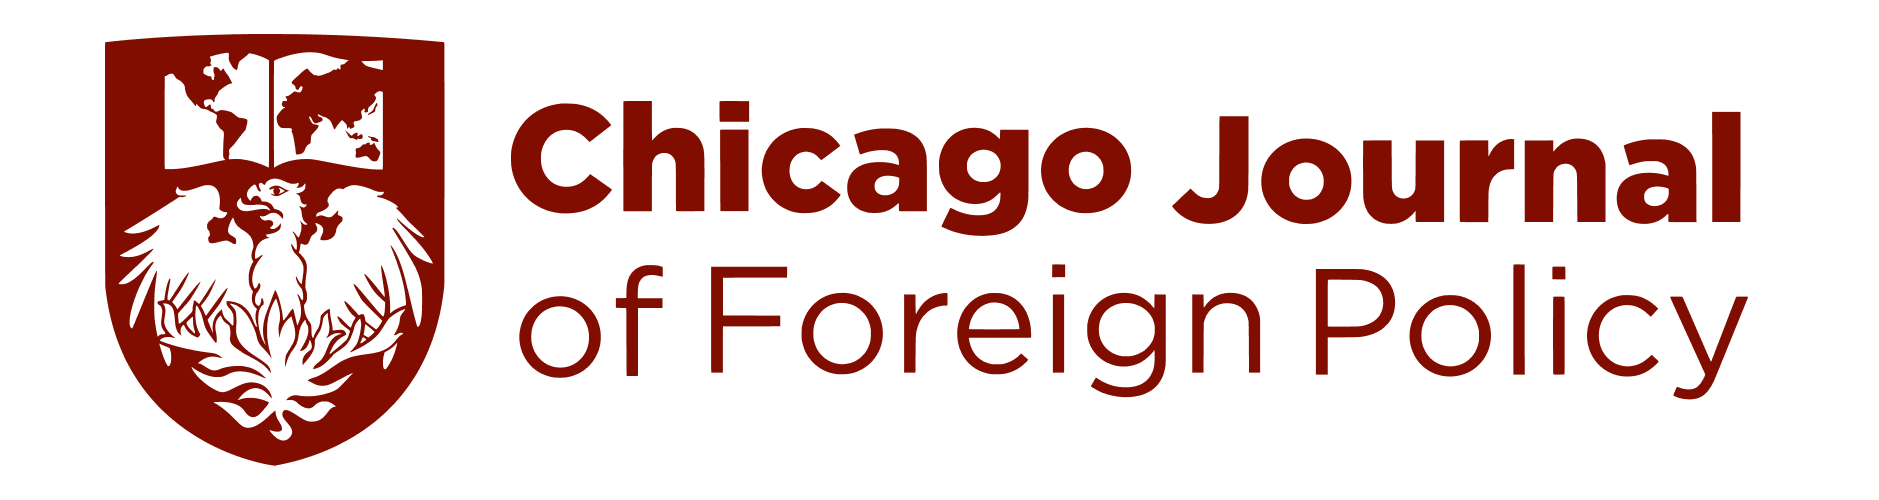 The Chicago Journal of Foreign Policy